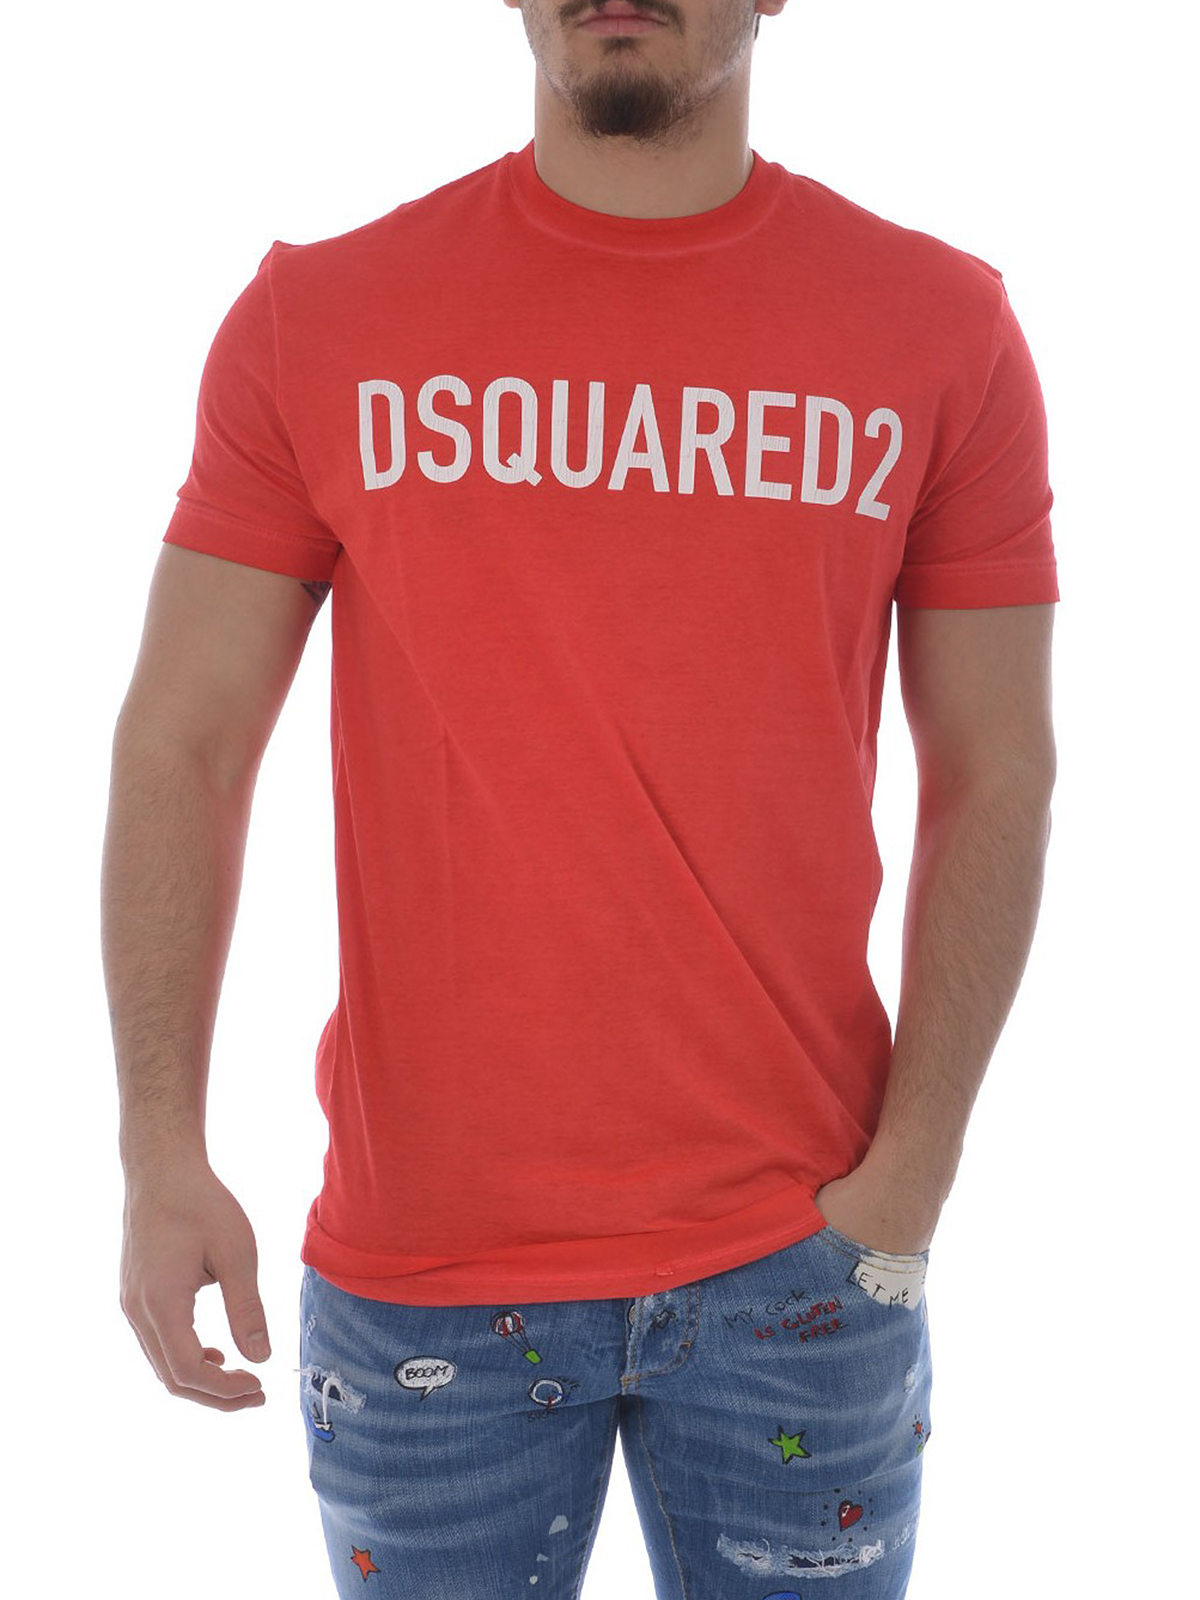 dsquared2 t shirt red